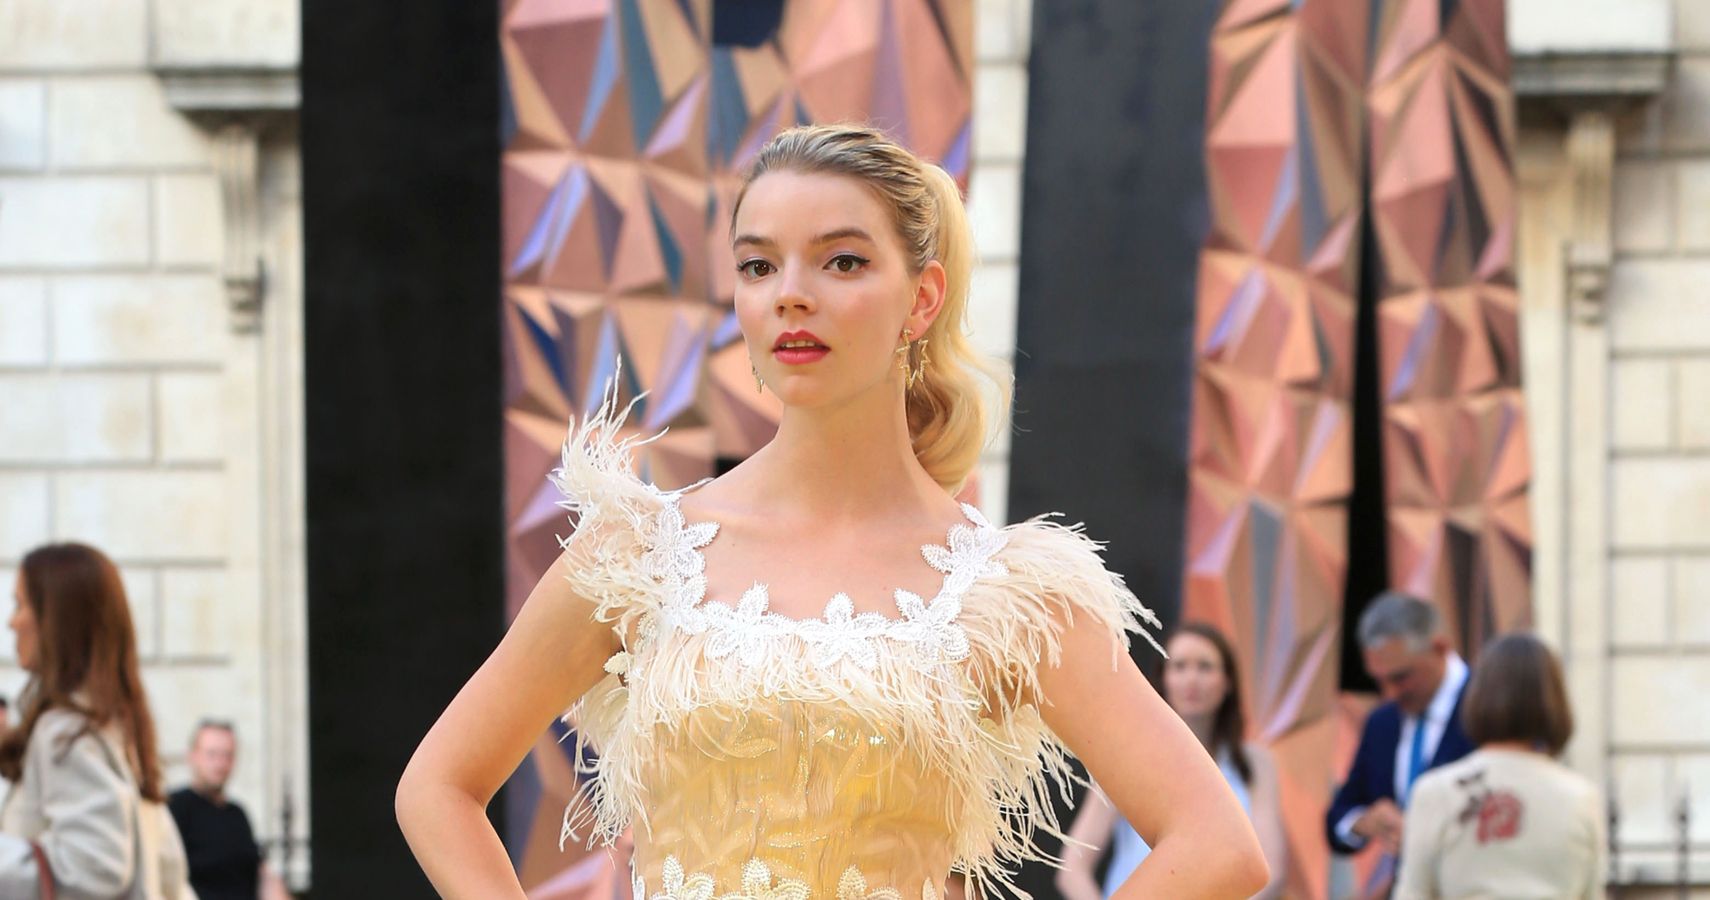 Anya Taylor-Joy and Lil Nas X will appear in the final episode of this season of Saturday Night Live set to air on May 22.